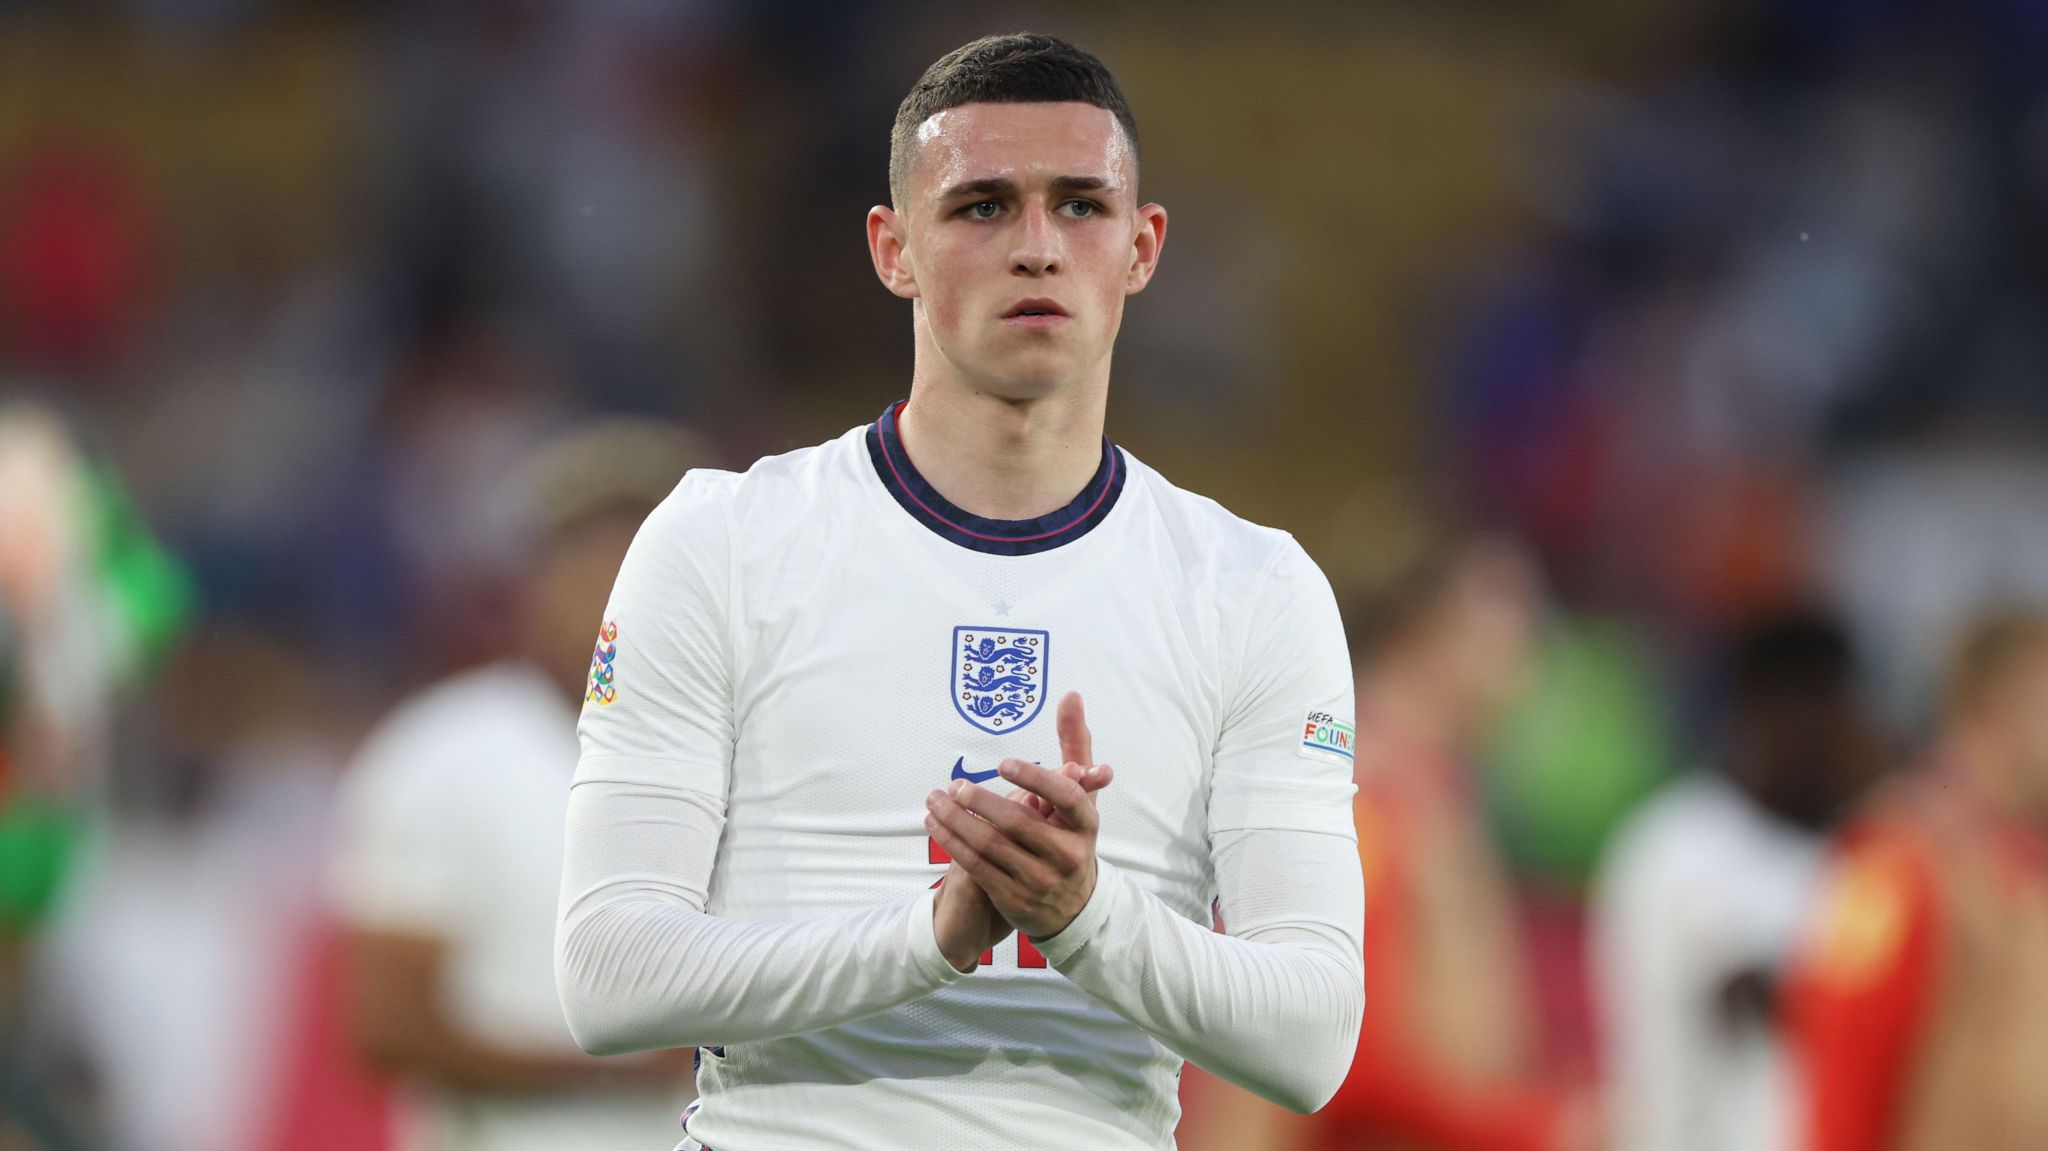 England should build the system around Foden' - BBC Sport